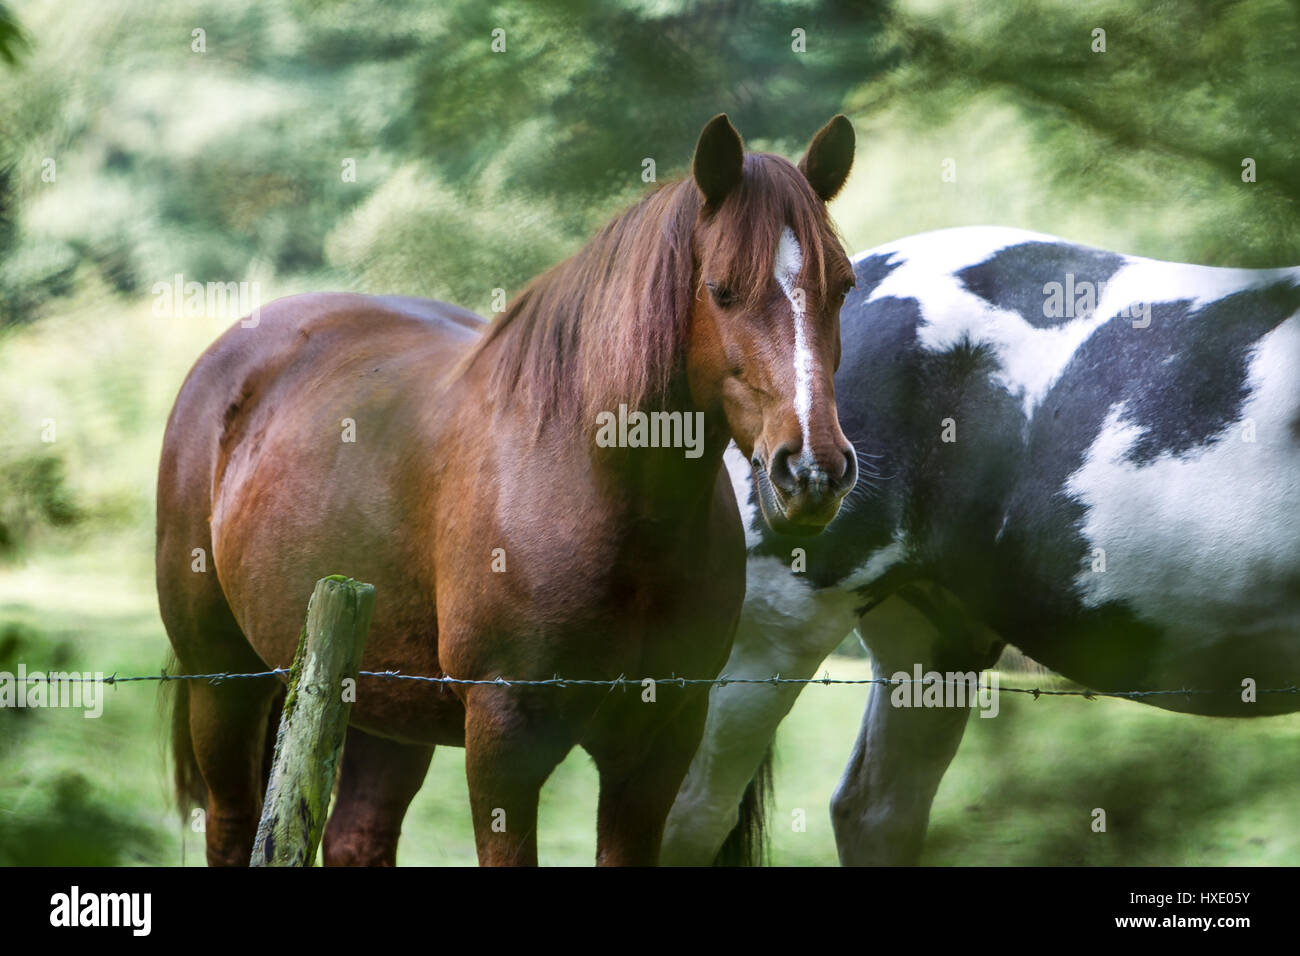 Two horses standing by a fence surrounded by green trees Stock Photo